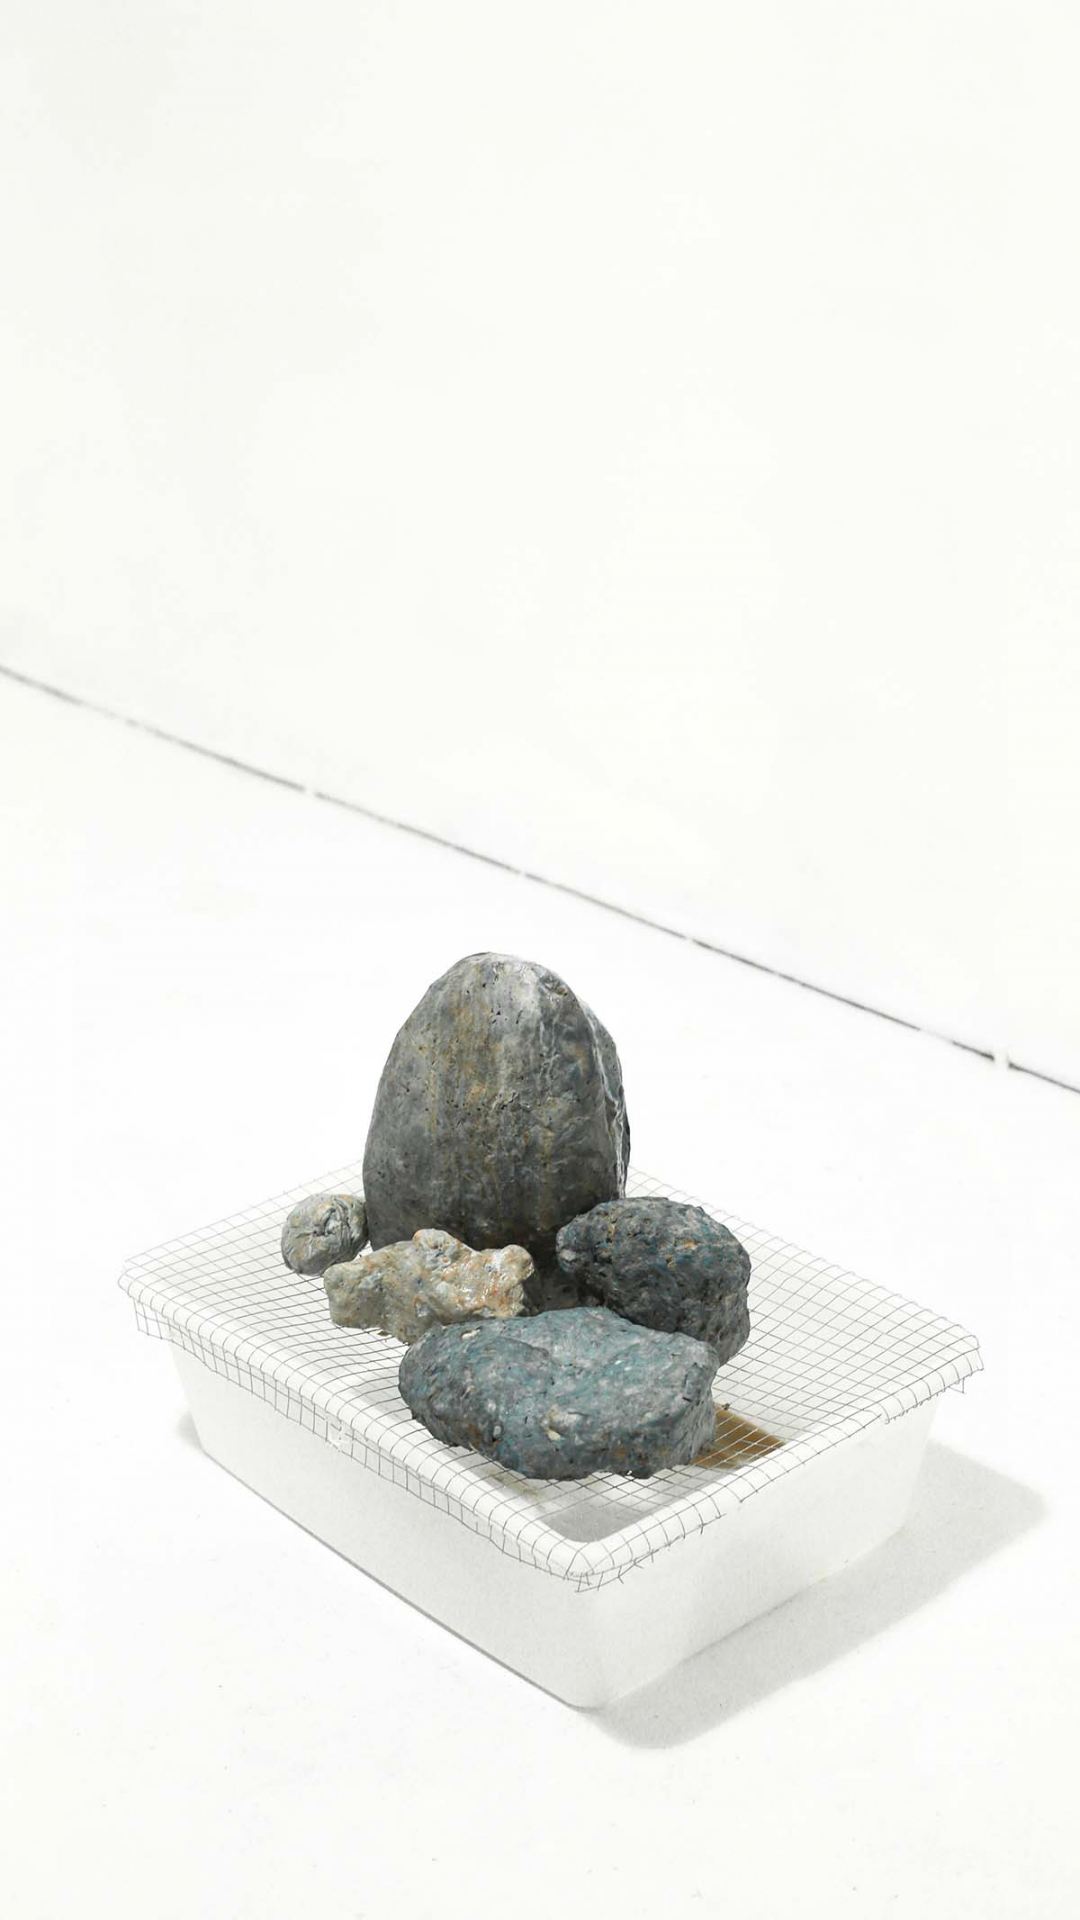 Shots of an installation featuring several rocks in a white space.